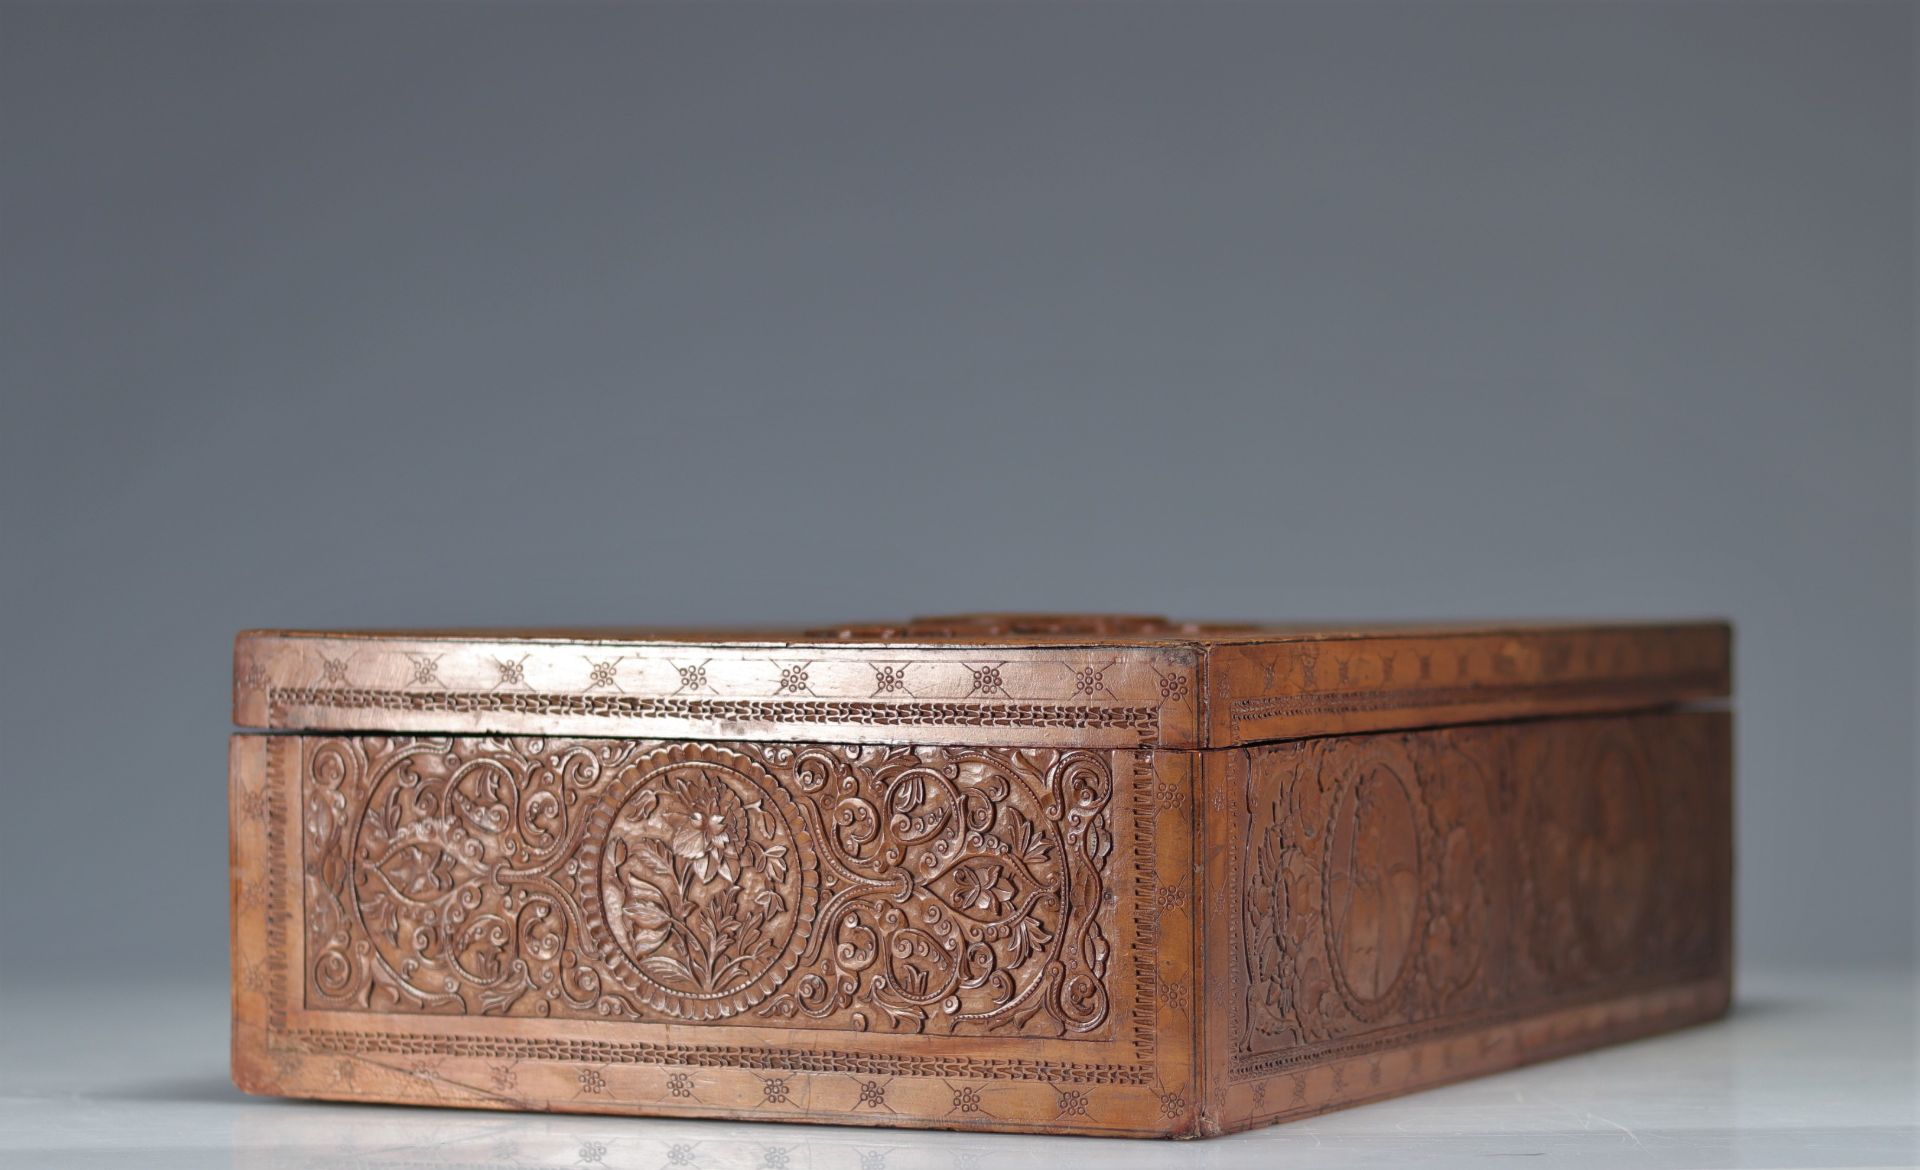 Grand Ottoman box in finely carved wood - Image 3 of 3